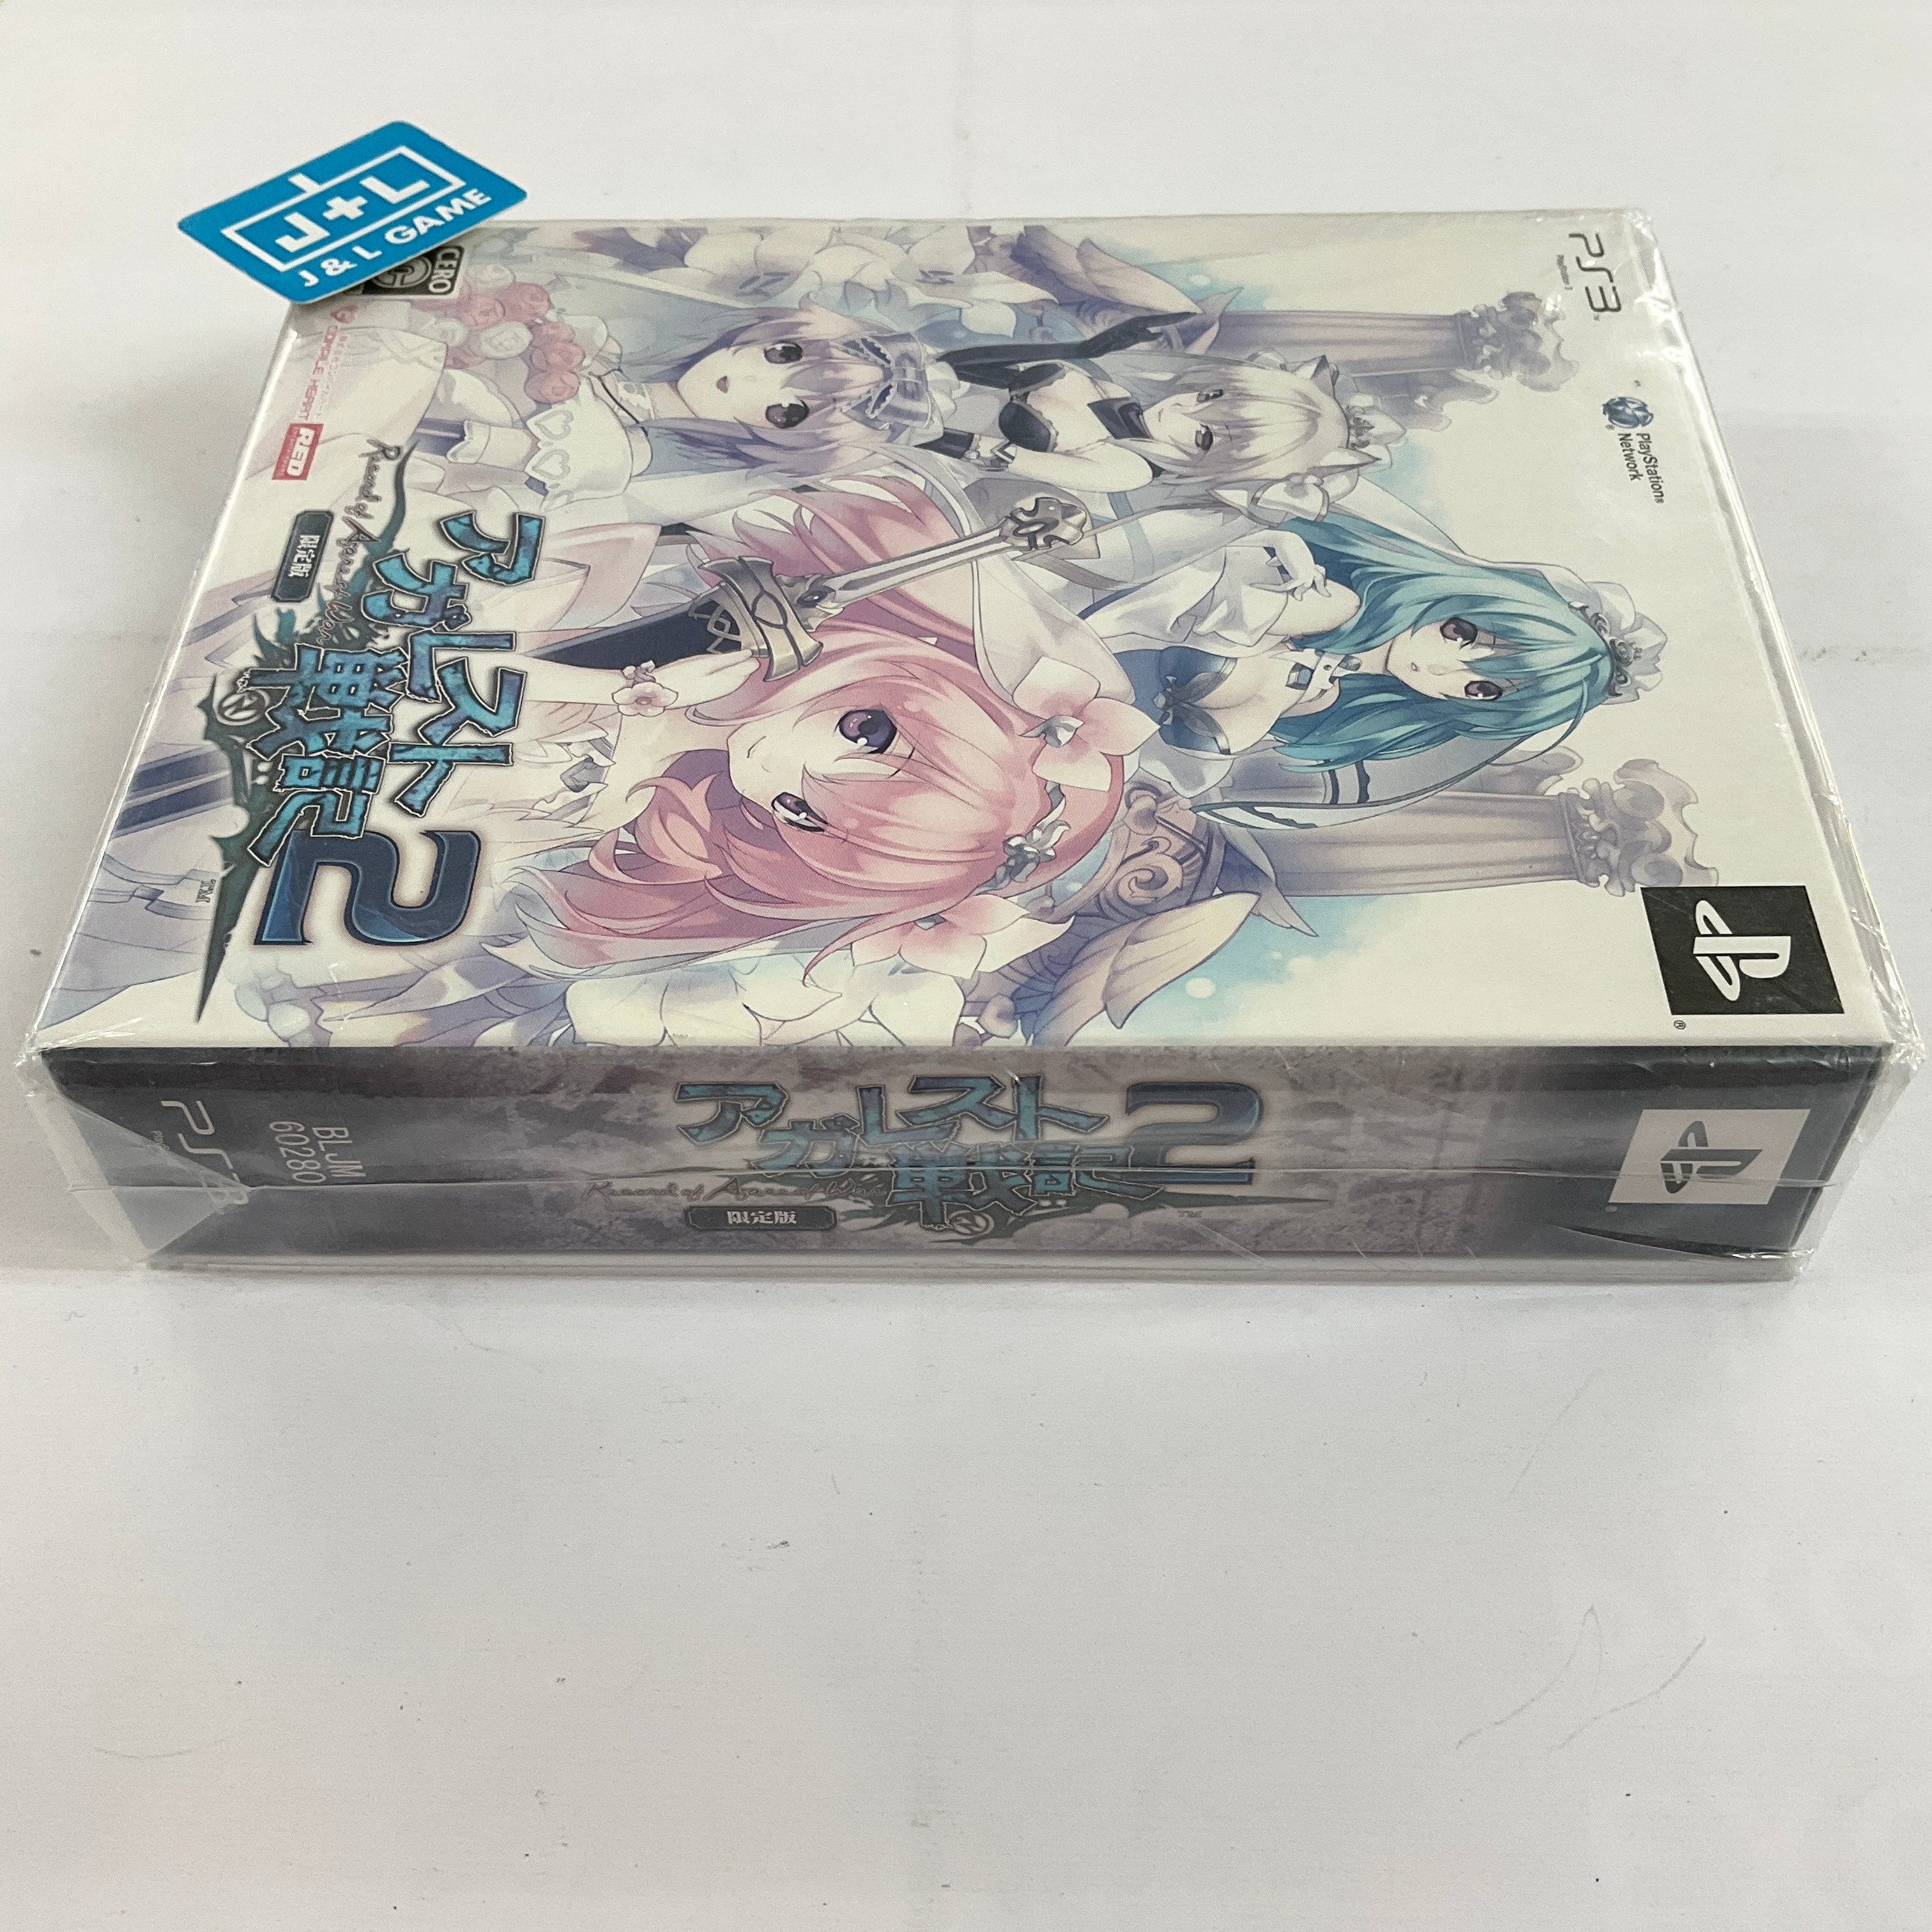 Agarest Senki 2 (Limited Edition) - (PS3) PlayStation 3 (Japanese Import) Video Games Aksys Games   